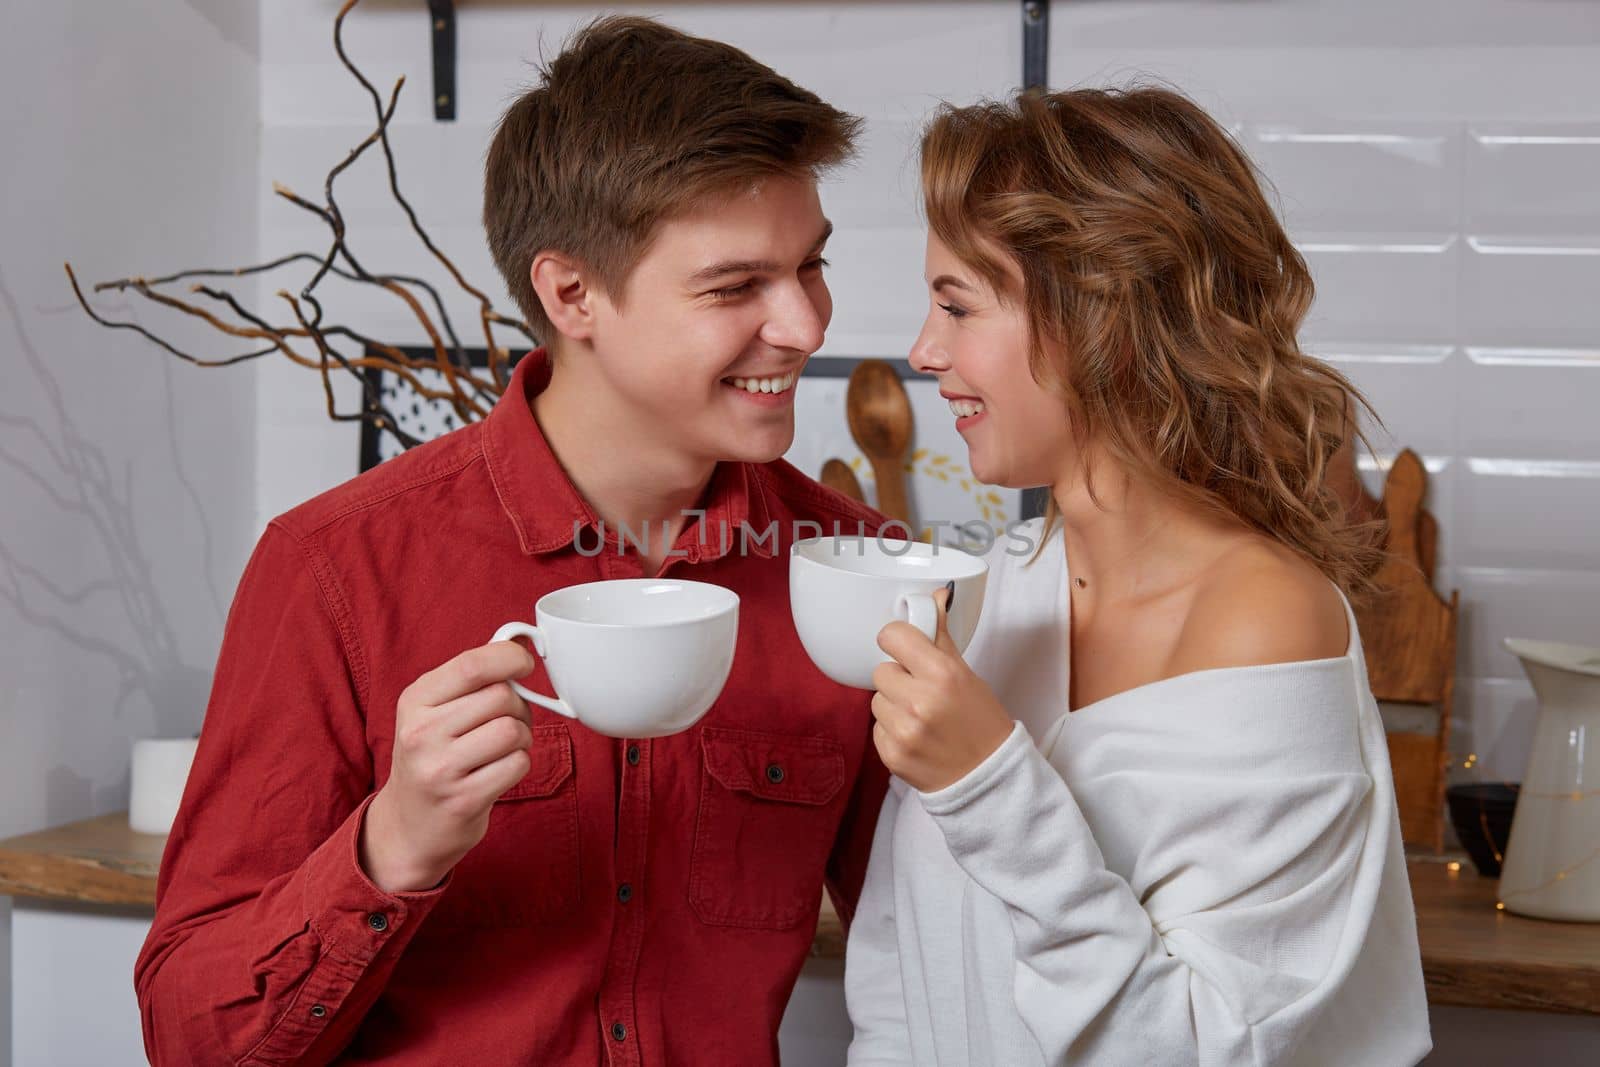 Happy young lovely couple on kitchen hugging each other. They enjoy spending time togehter. They drink coffee and smiling